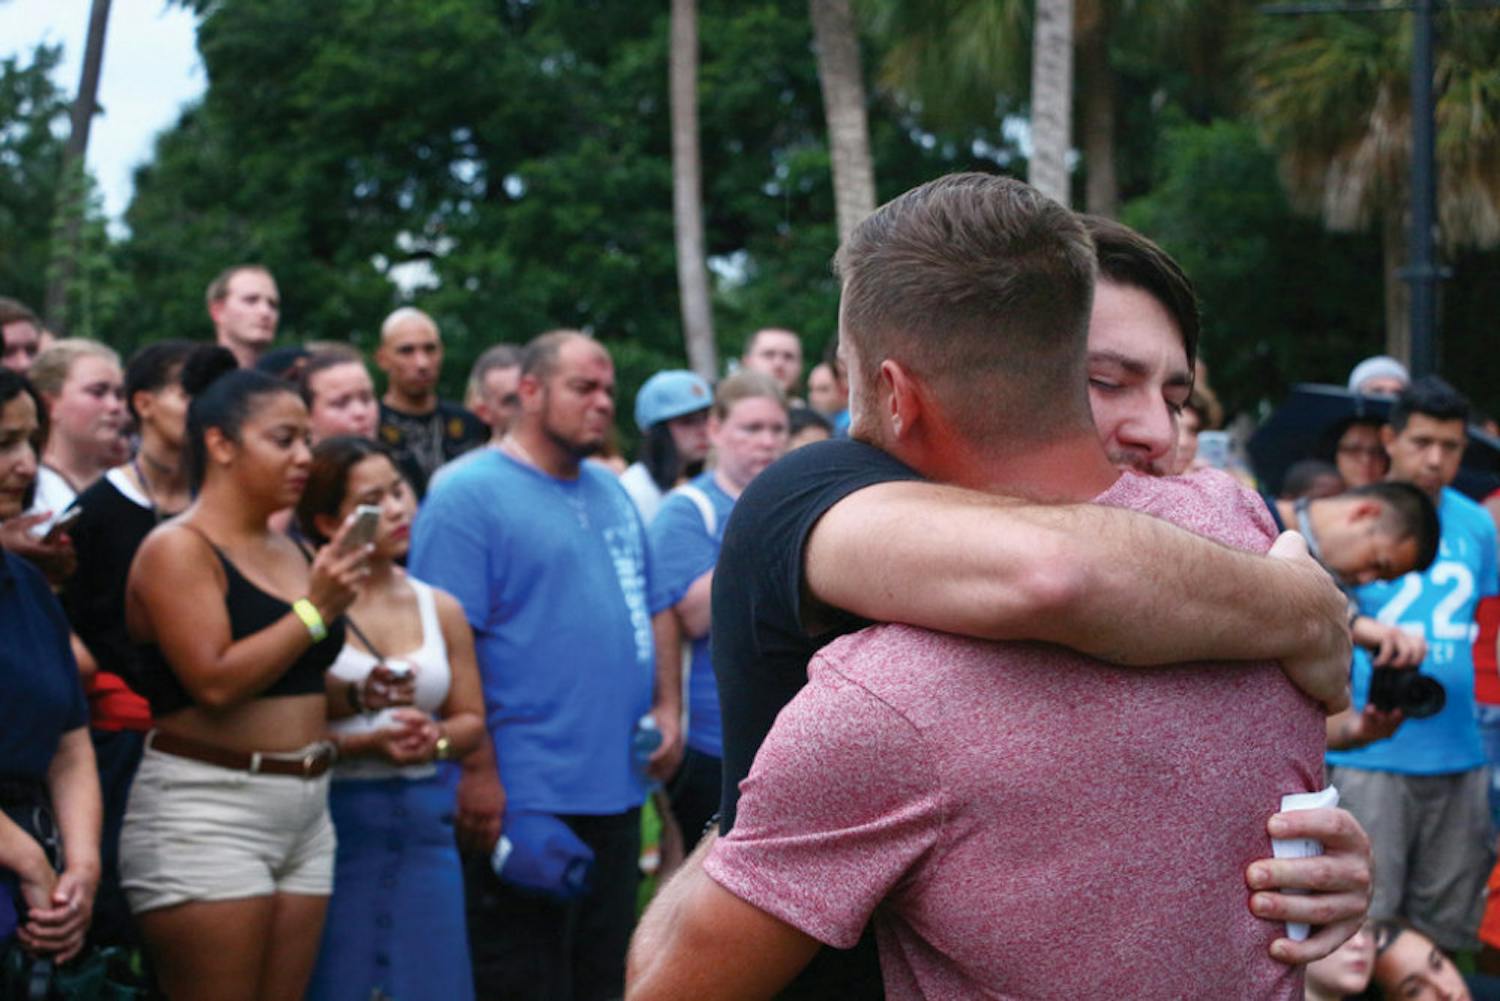 The organizer of a vigil for the victims of the Orlando nightclub shooting, Mitch Foster, 30, embraces Carlos Perez, 26, at Lake Eola Park on Sunday. “I needed to be surrounded by people who I knew were hurting as well, and that cared and that needed help, because I needed help,” Perez said.